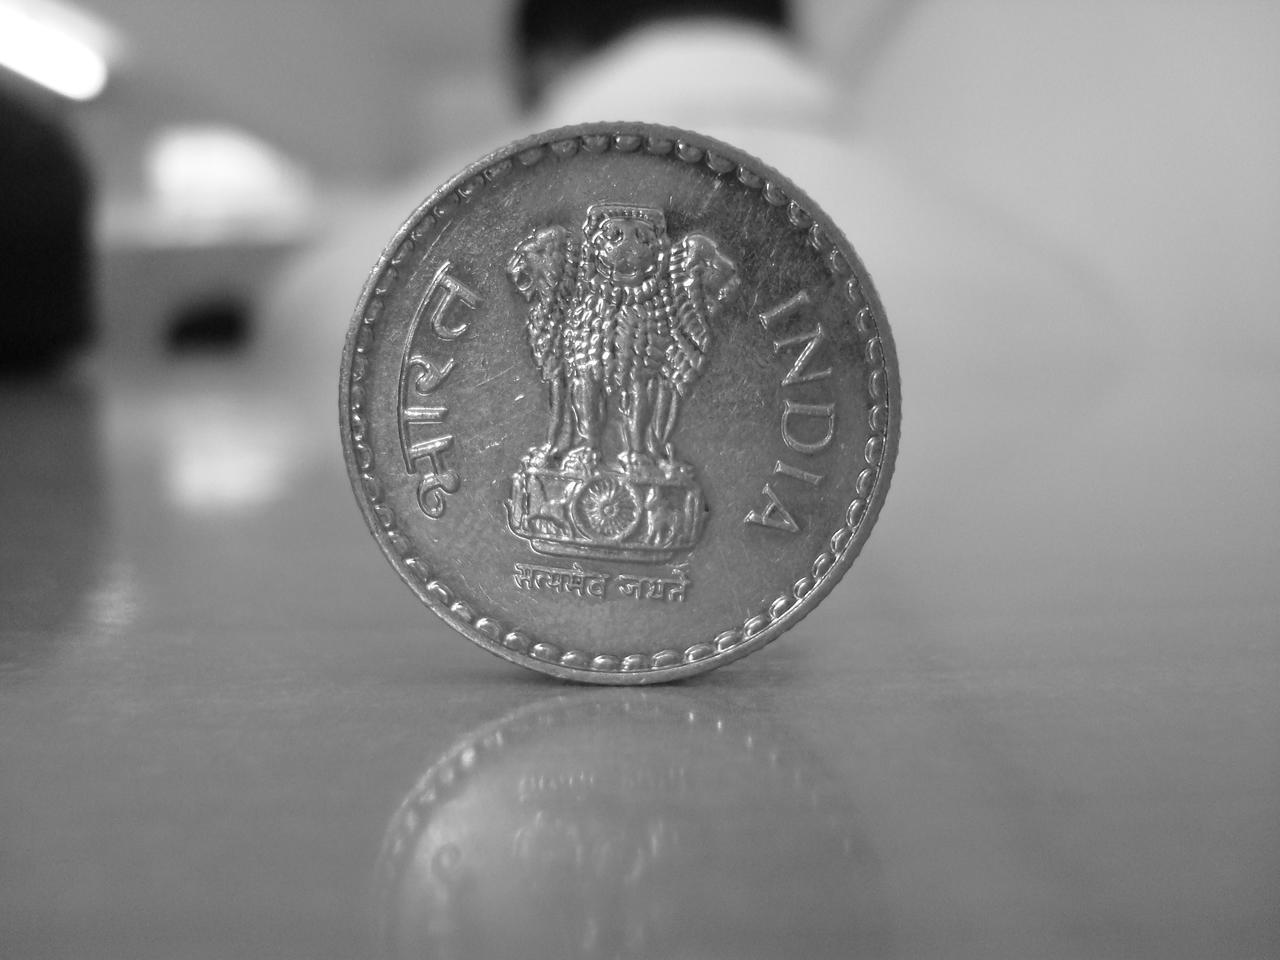 This photo “Five Rupee Coin” @flickr from Dinesh Cyanam made available under a Share Alike, Attribution license. 